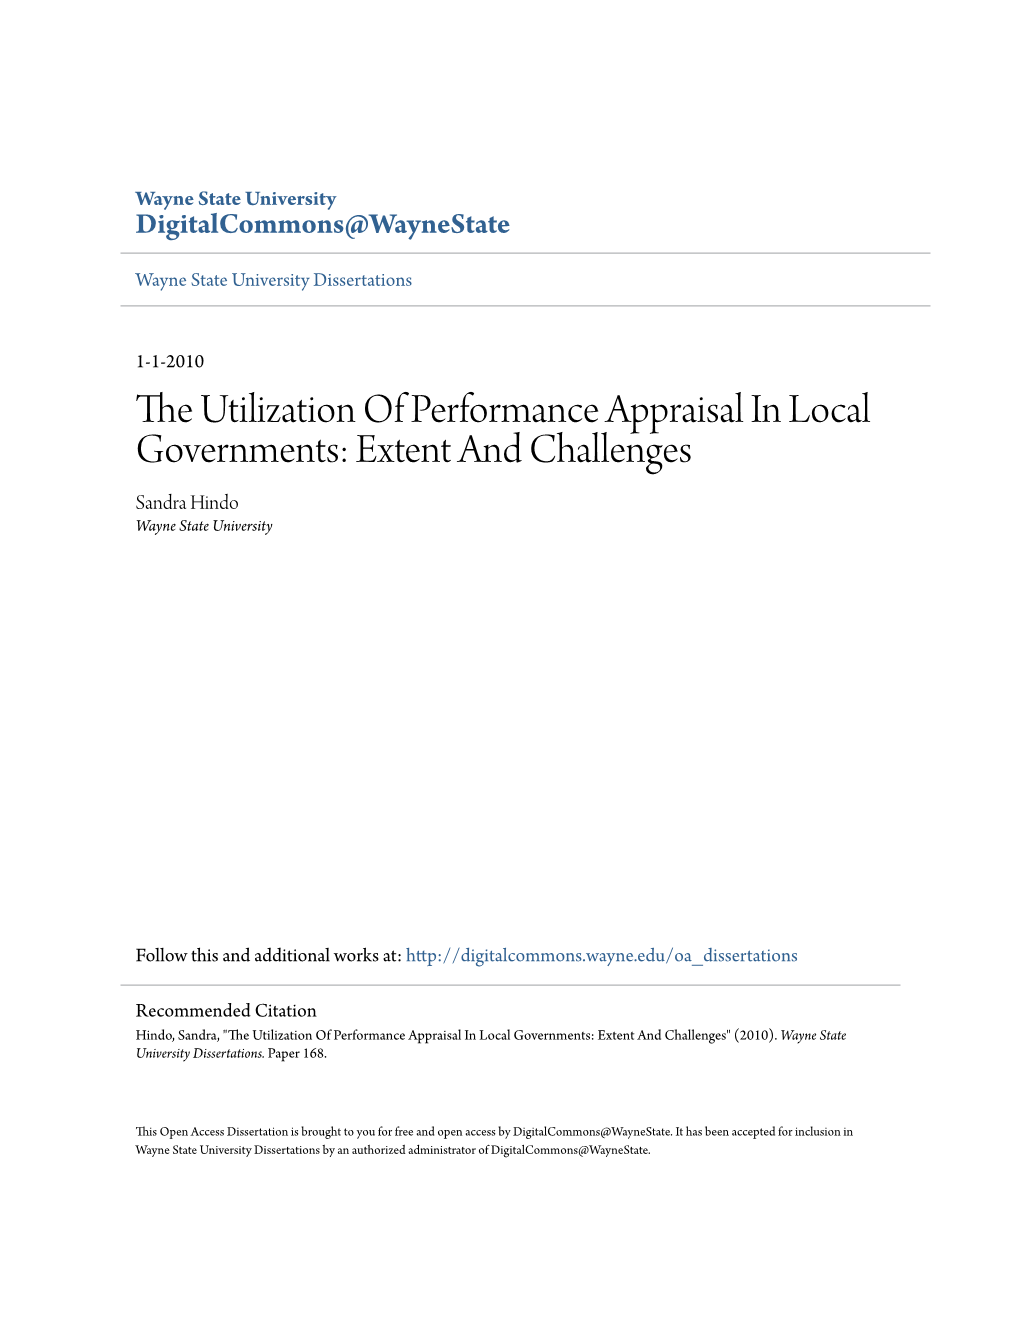 The Utilization of Performance Appraisal in Local Governments: Extent and Challenges